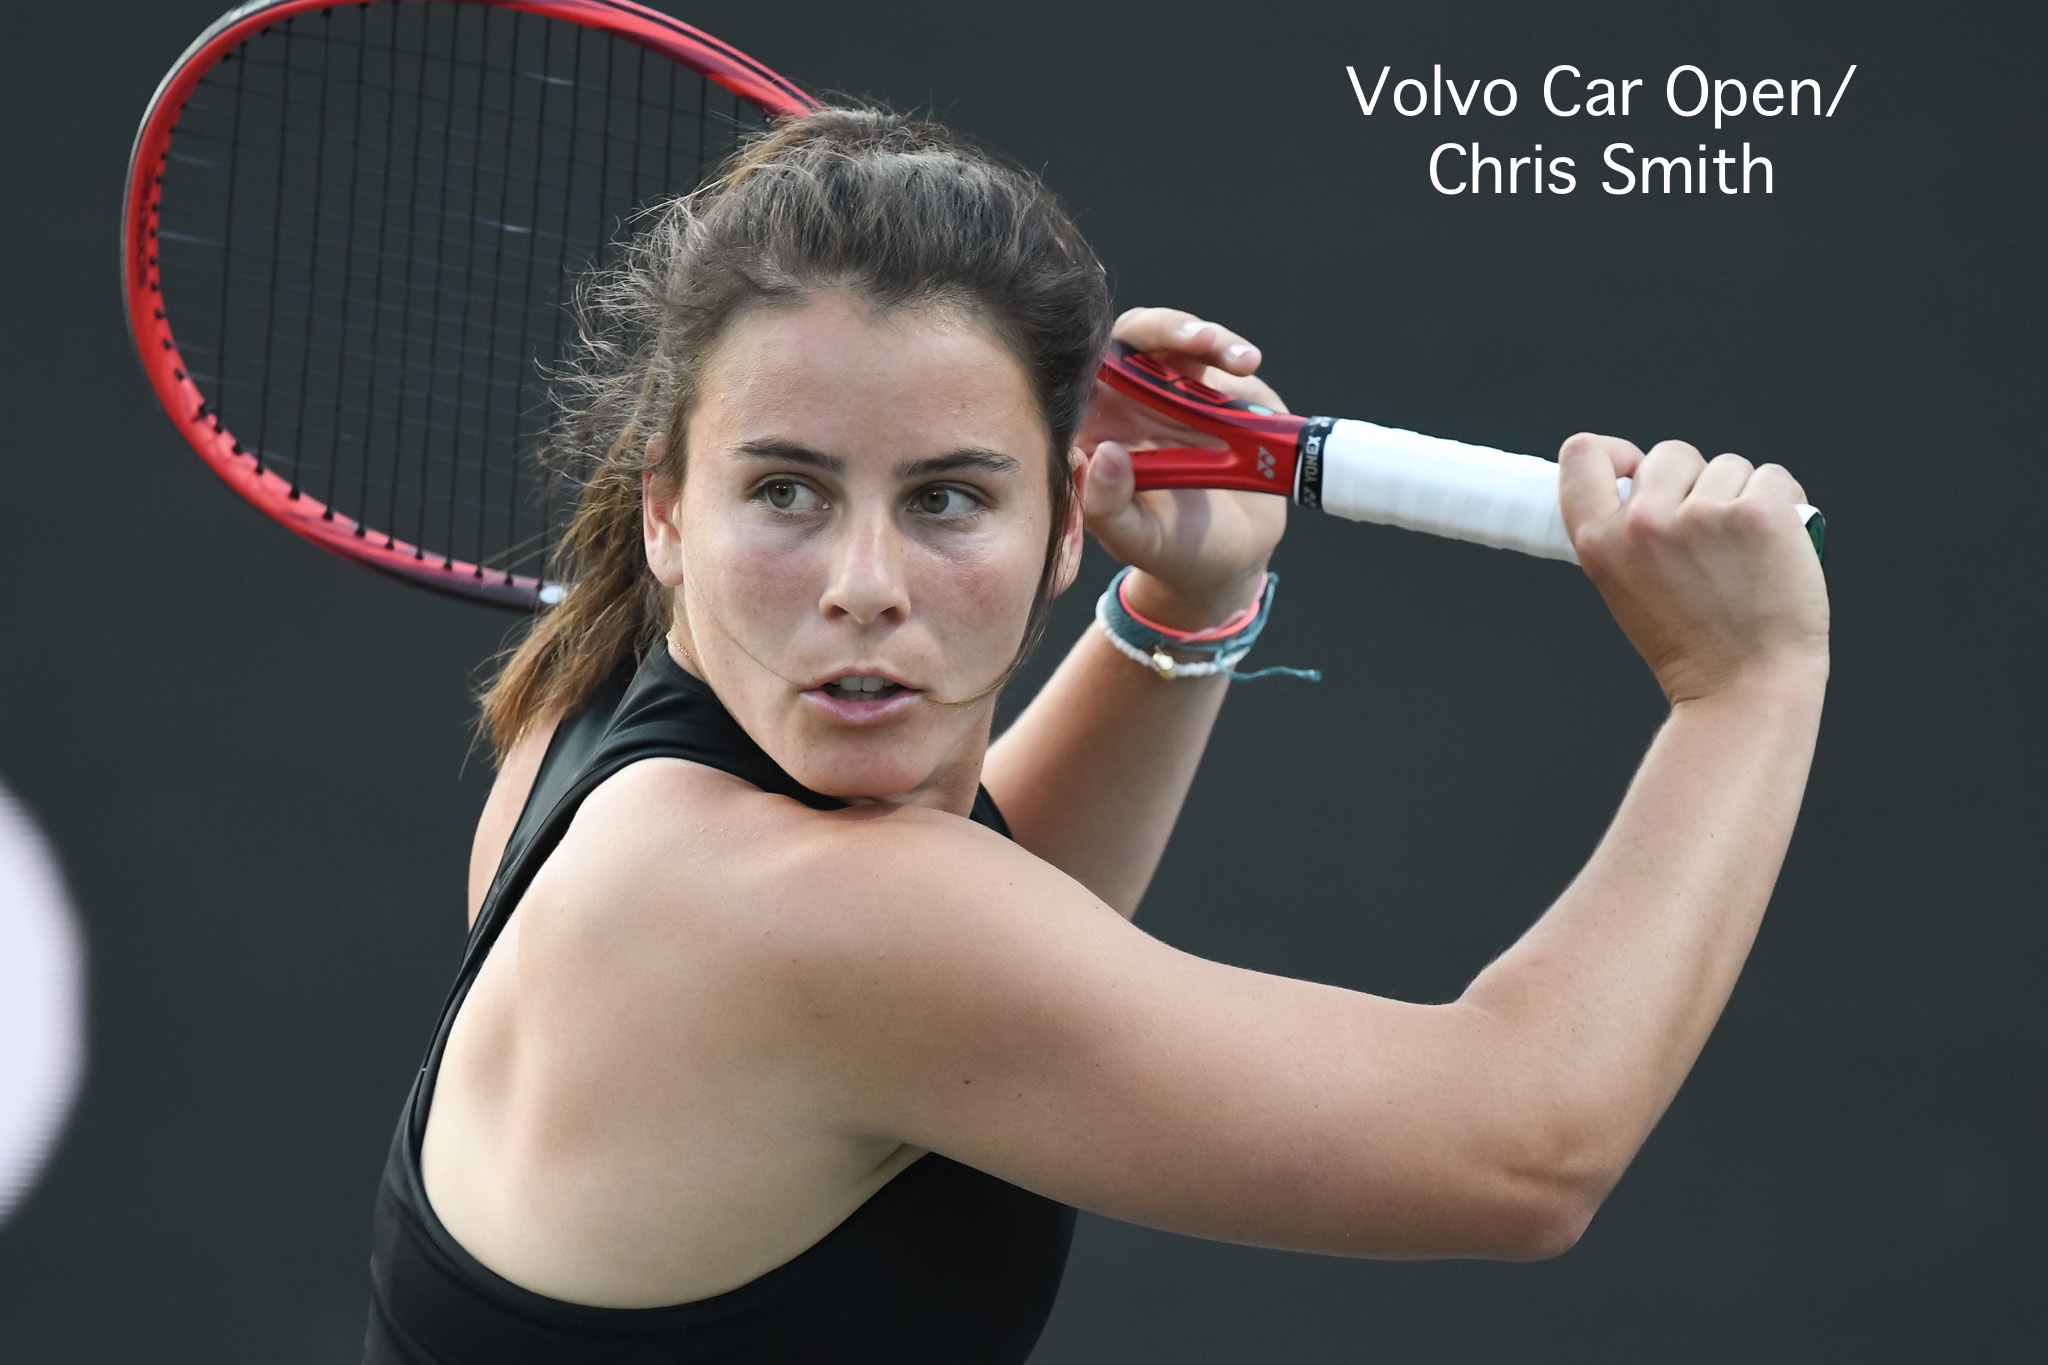 ZooTennis UVAs Navarro Wins First WTA Main Draw Match at Volvo Car Open; ITA Pushes Pause Button on Singles and Doubles Rankings, Will Publish Both Computer Rankings and Coaches Poll; More on